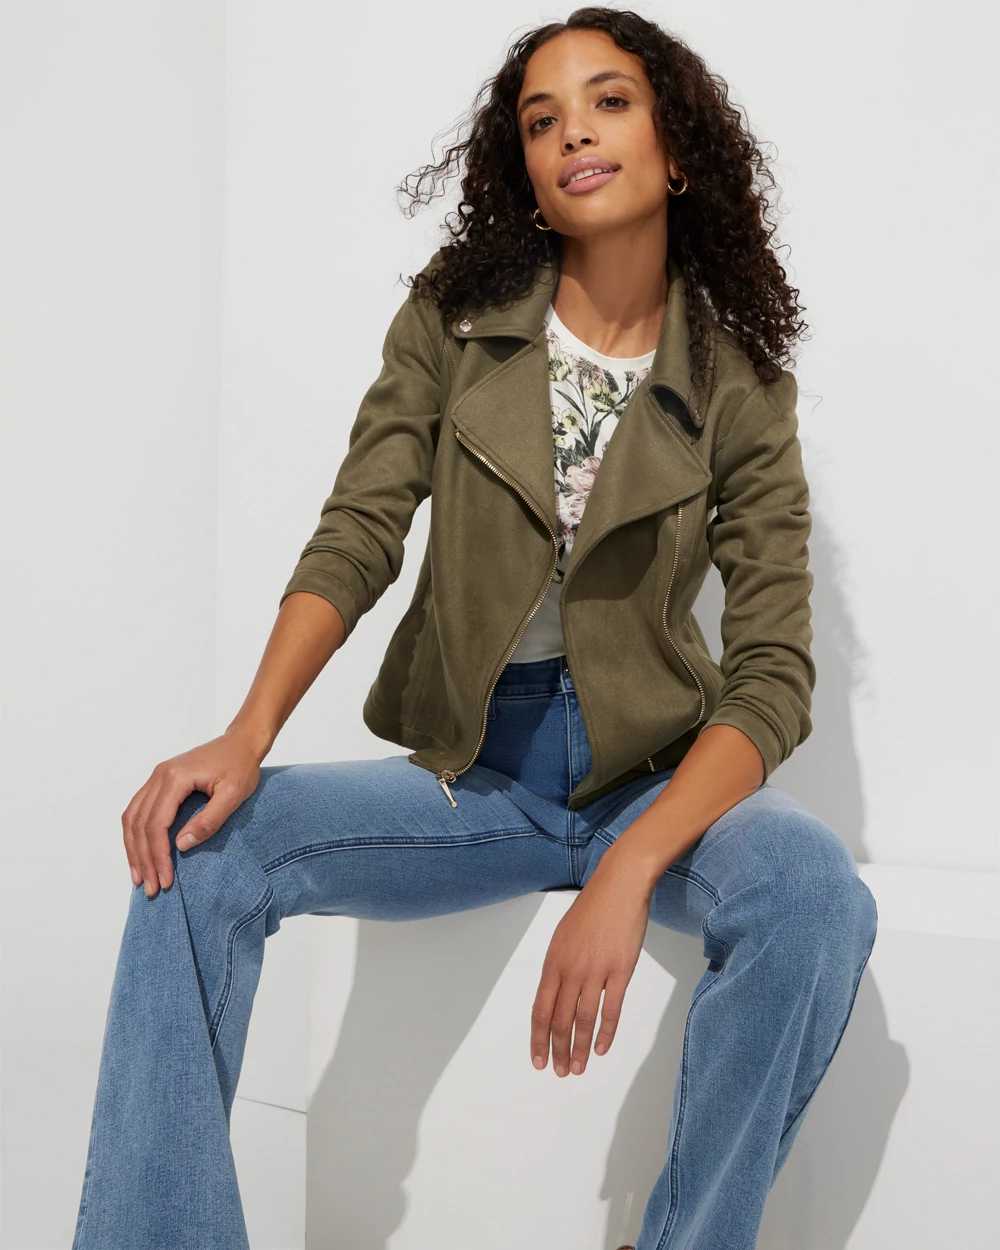 Outlet WHBM Long Sleeve Faux Suede Moto click to view larger image.